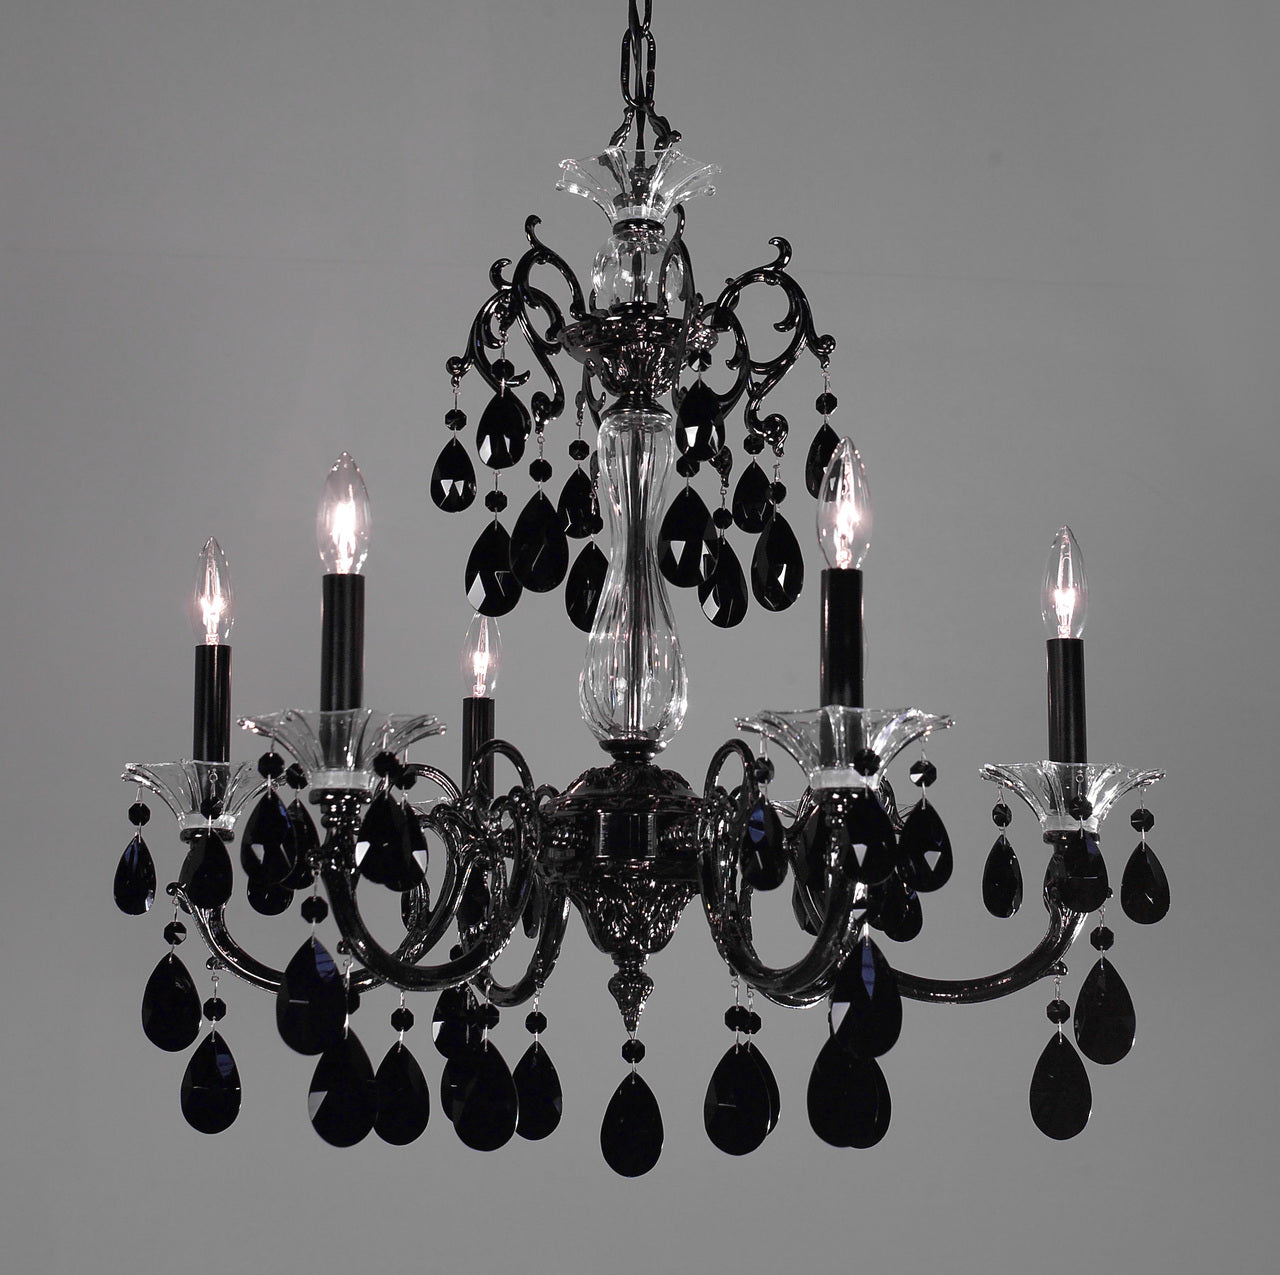 Classic Lighting 57056 CHP S Via Lombardi Crystal Chandelier in Champagne Pearl (Imported from Spain)